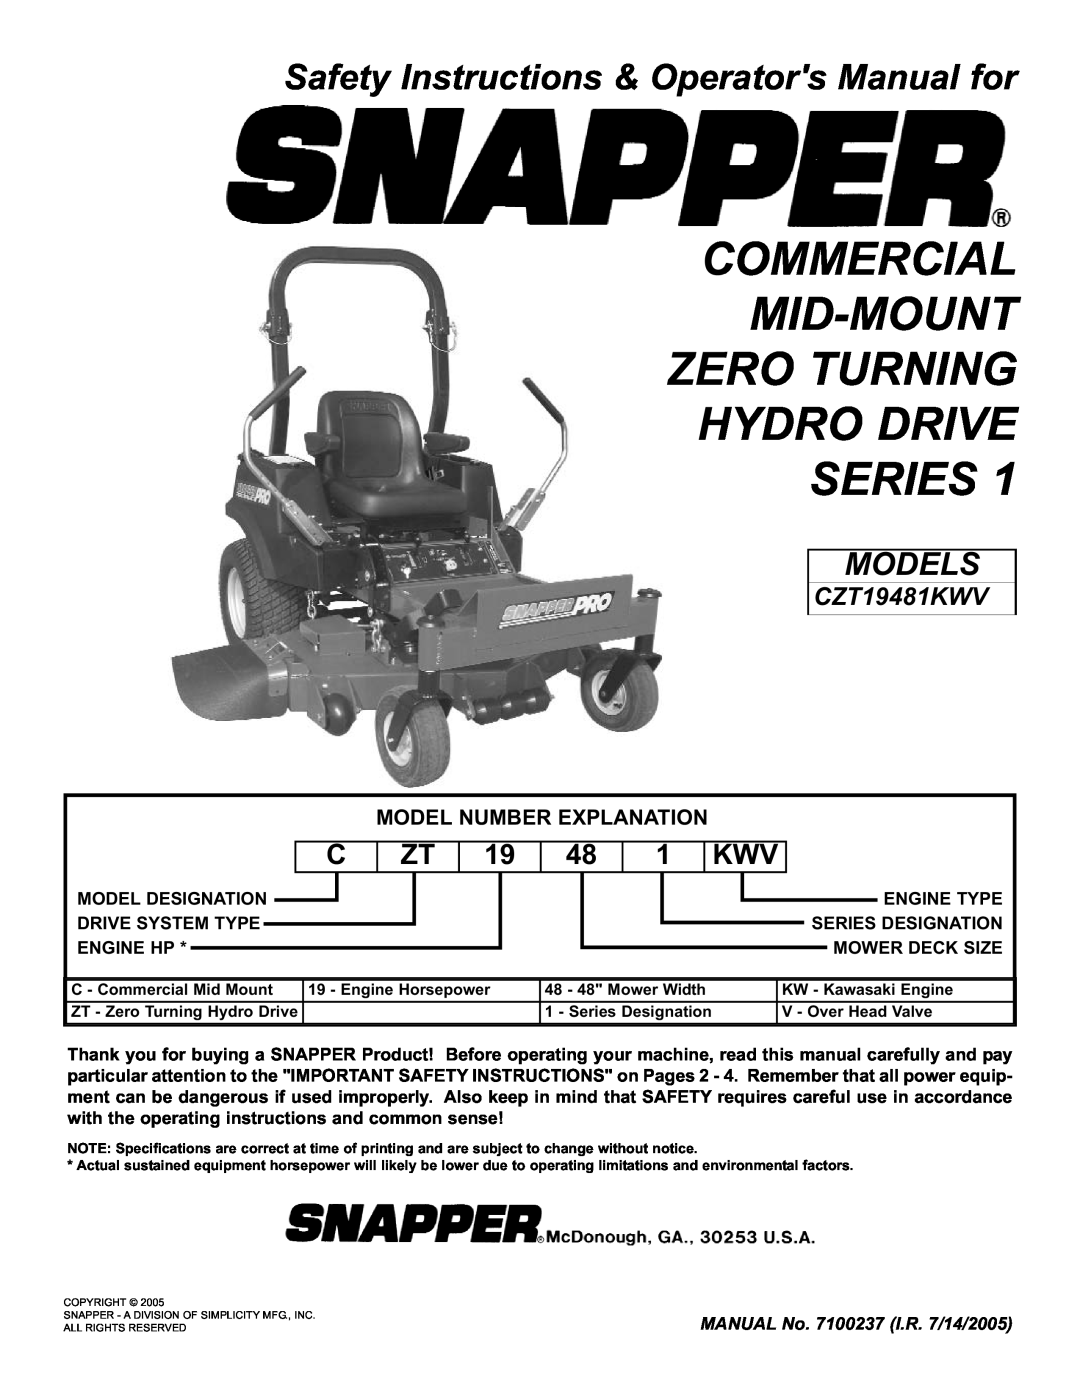 Snapper CZT19481KWV important safety instructions Commercial Mid-Mount Zero Turning Hydro Drive Series, Models 